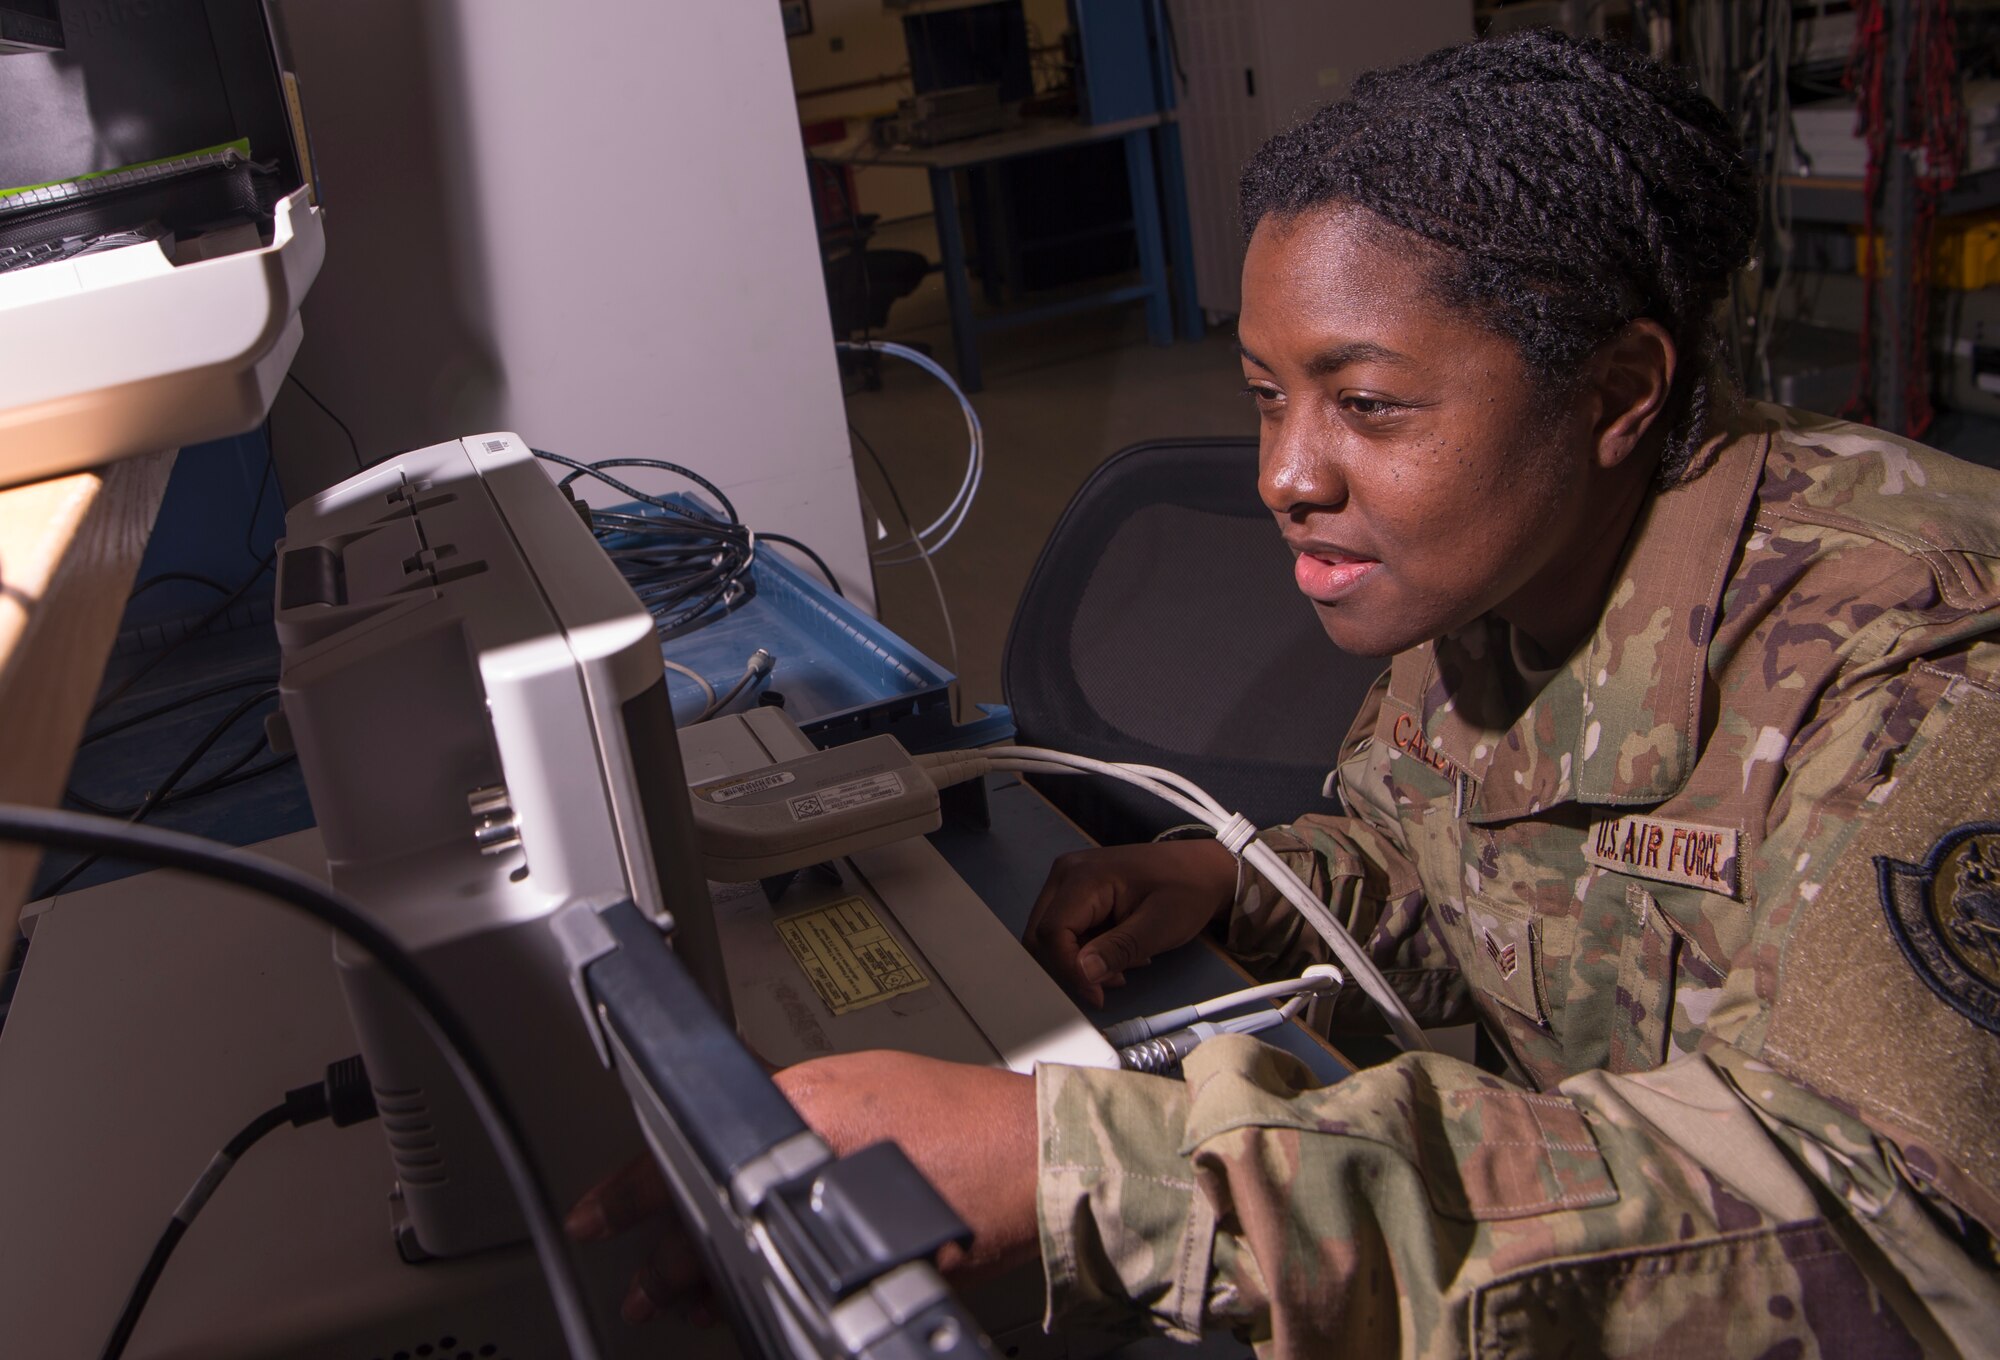 Senior Airman Janae Caldwell, 379th Expeditionary Maintenance Squadron (EMXS) precision measurement equipment laboratory (PMEL) test, measurement and diagnostic equipment (TMDE) technician, calibrates a piece of equipment with an oscilloscope Jan. 25, 2019, at Al Udeid Air Base, Qatar. The team supports approximately 14,000 pieces of TMDE and can forward deploy to locations throughout U.S. Air Forces Central Command to provide precise calibration for equipment that can’t be transported to Al Udeid. (U.S. Air Force Tech. Sgt. Christopher Hubenthal)